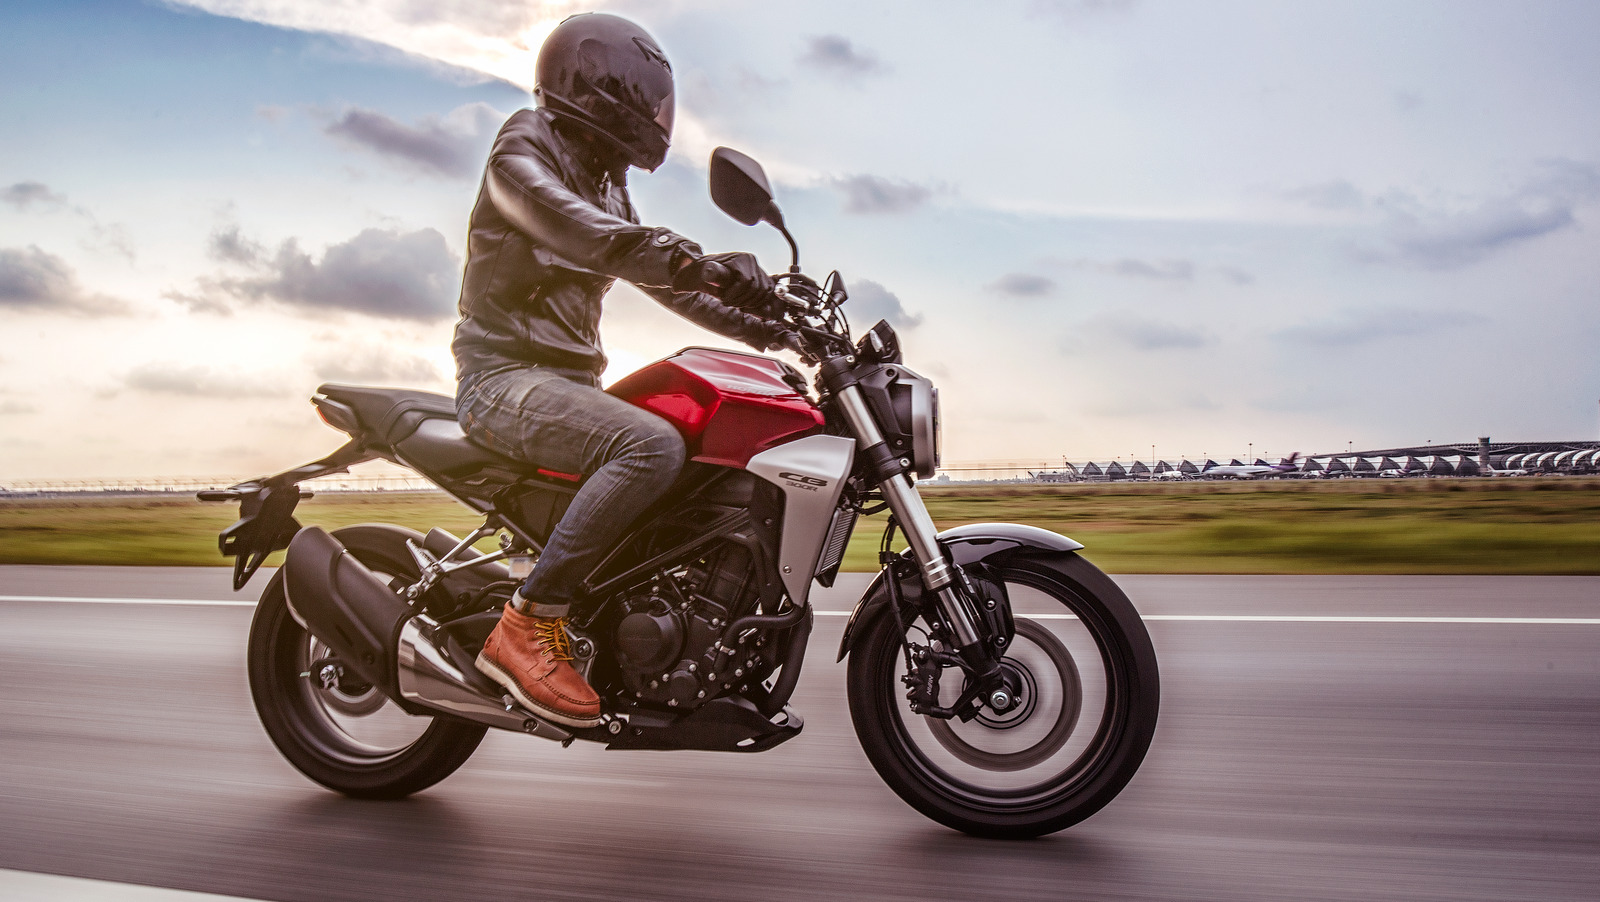 Is Honda's CB300R A Good Bike For Beginners? Here's What You Need To Know